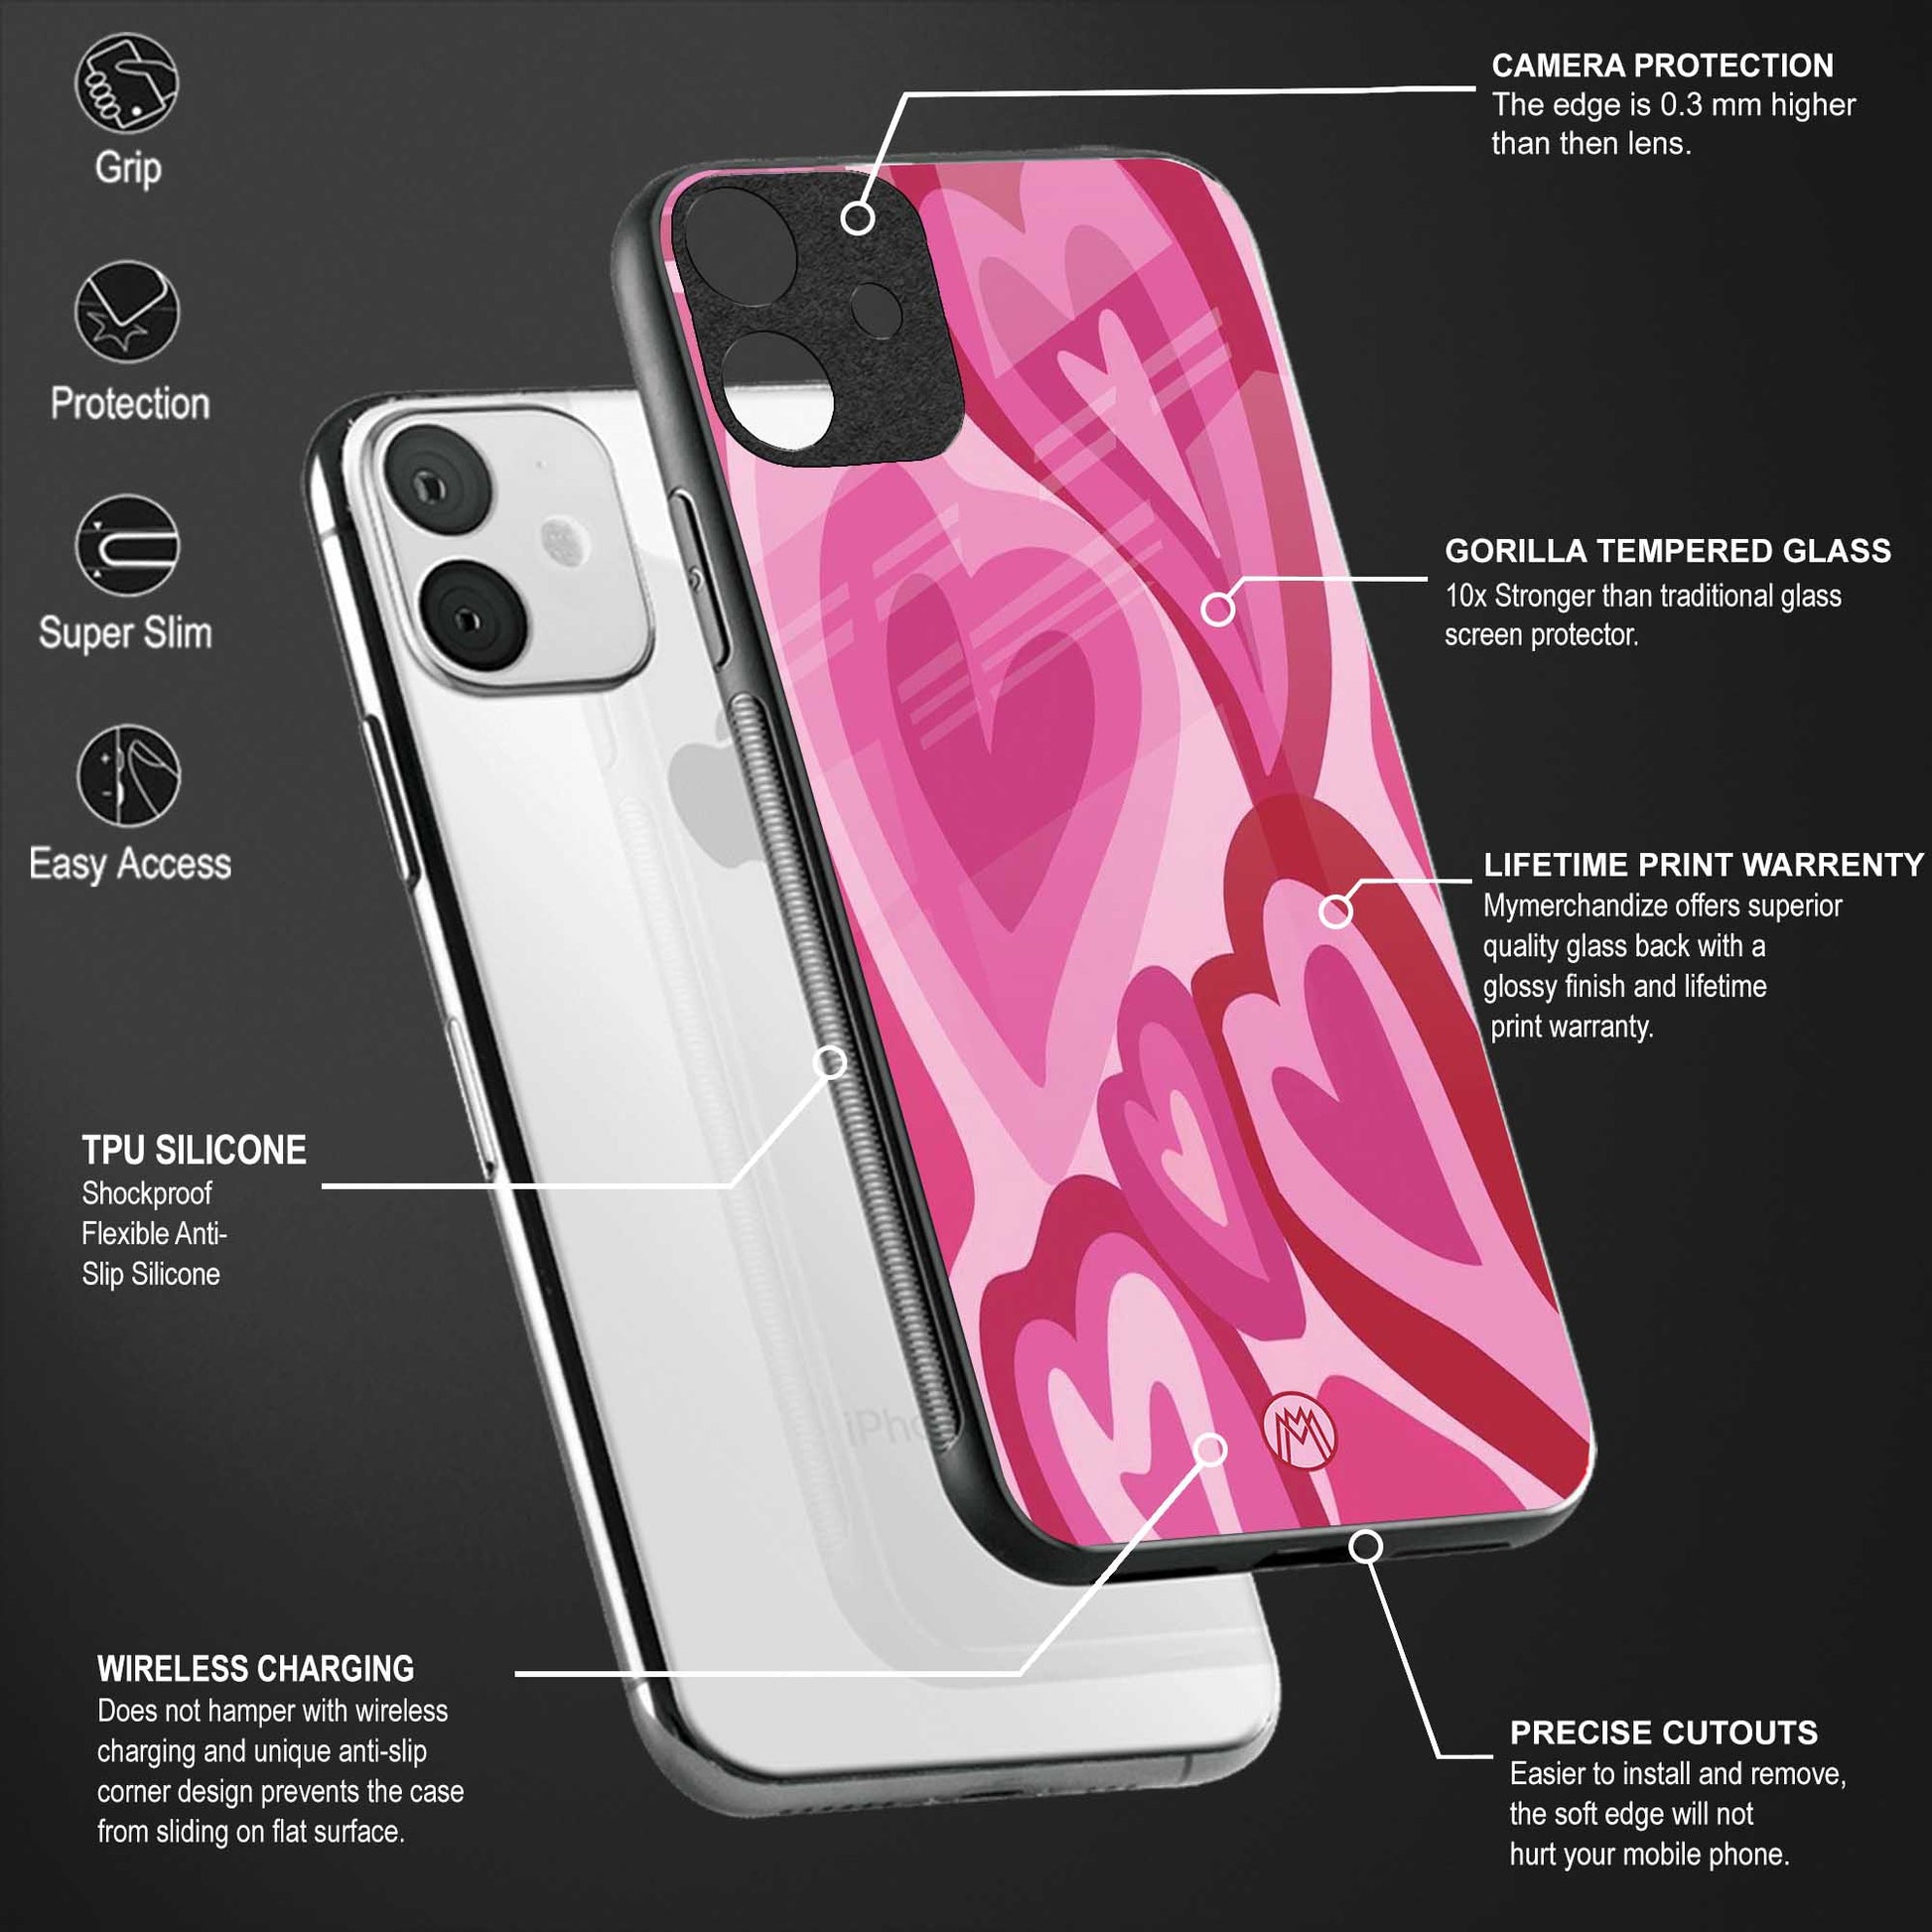 y2k pink hearts back phone cover | glass case for vivo y16